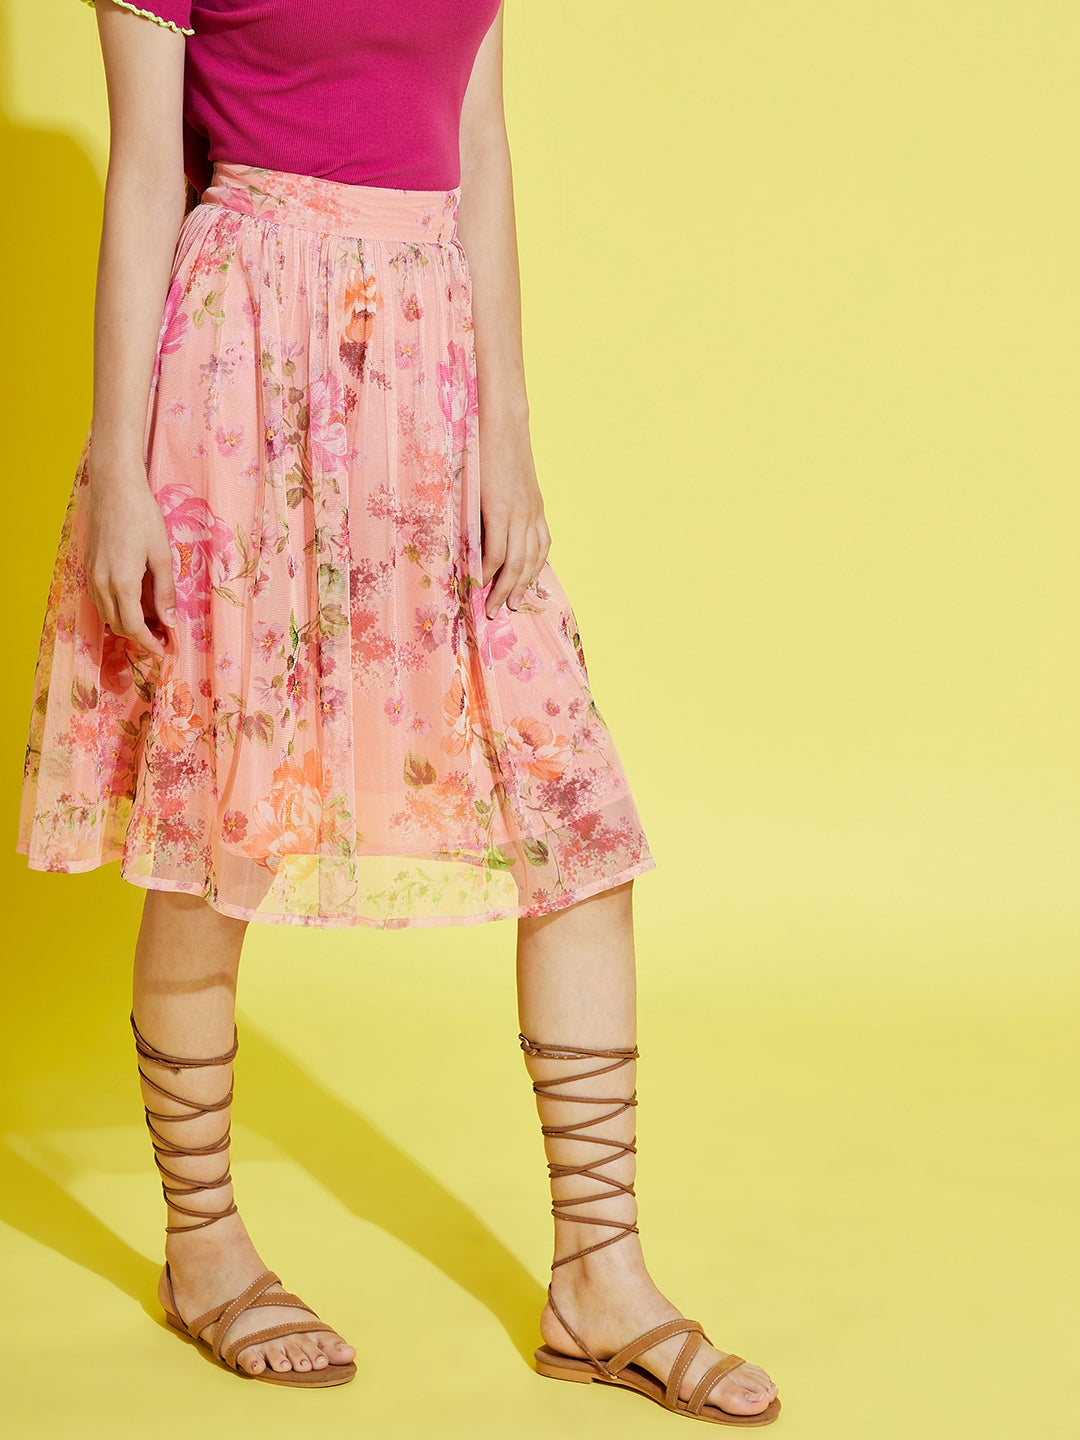 Girls Peach Floral Tulle Gathered Skirt